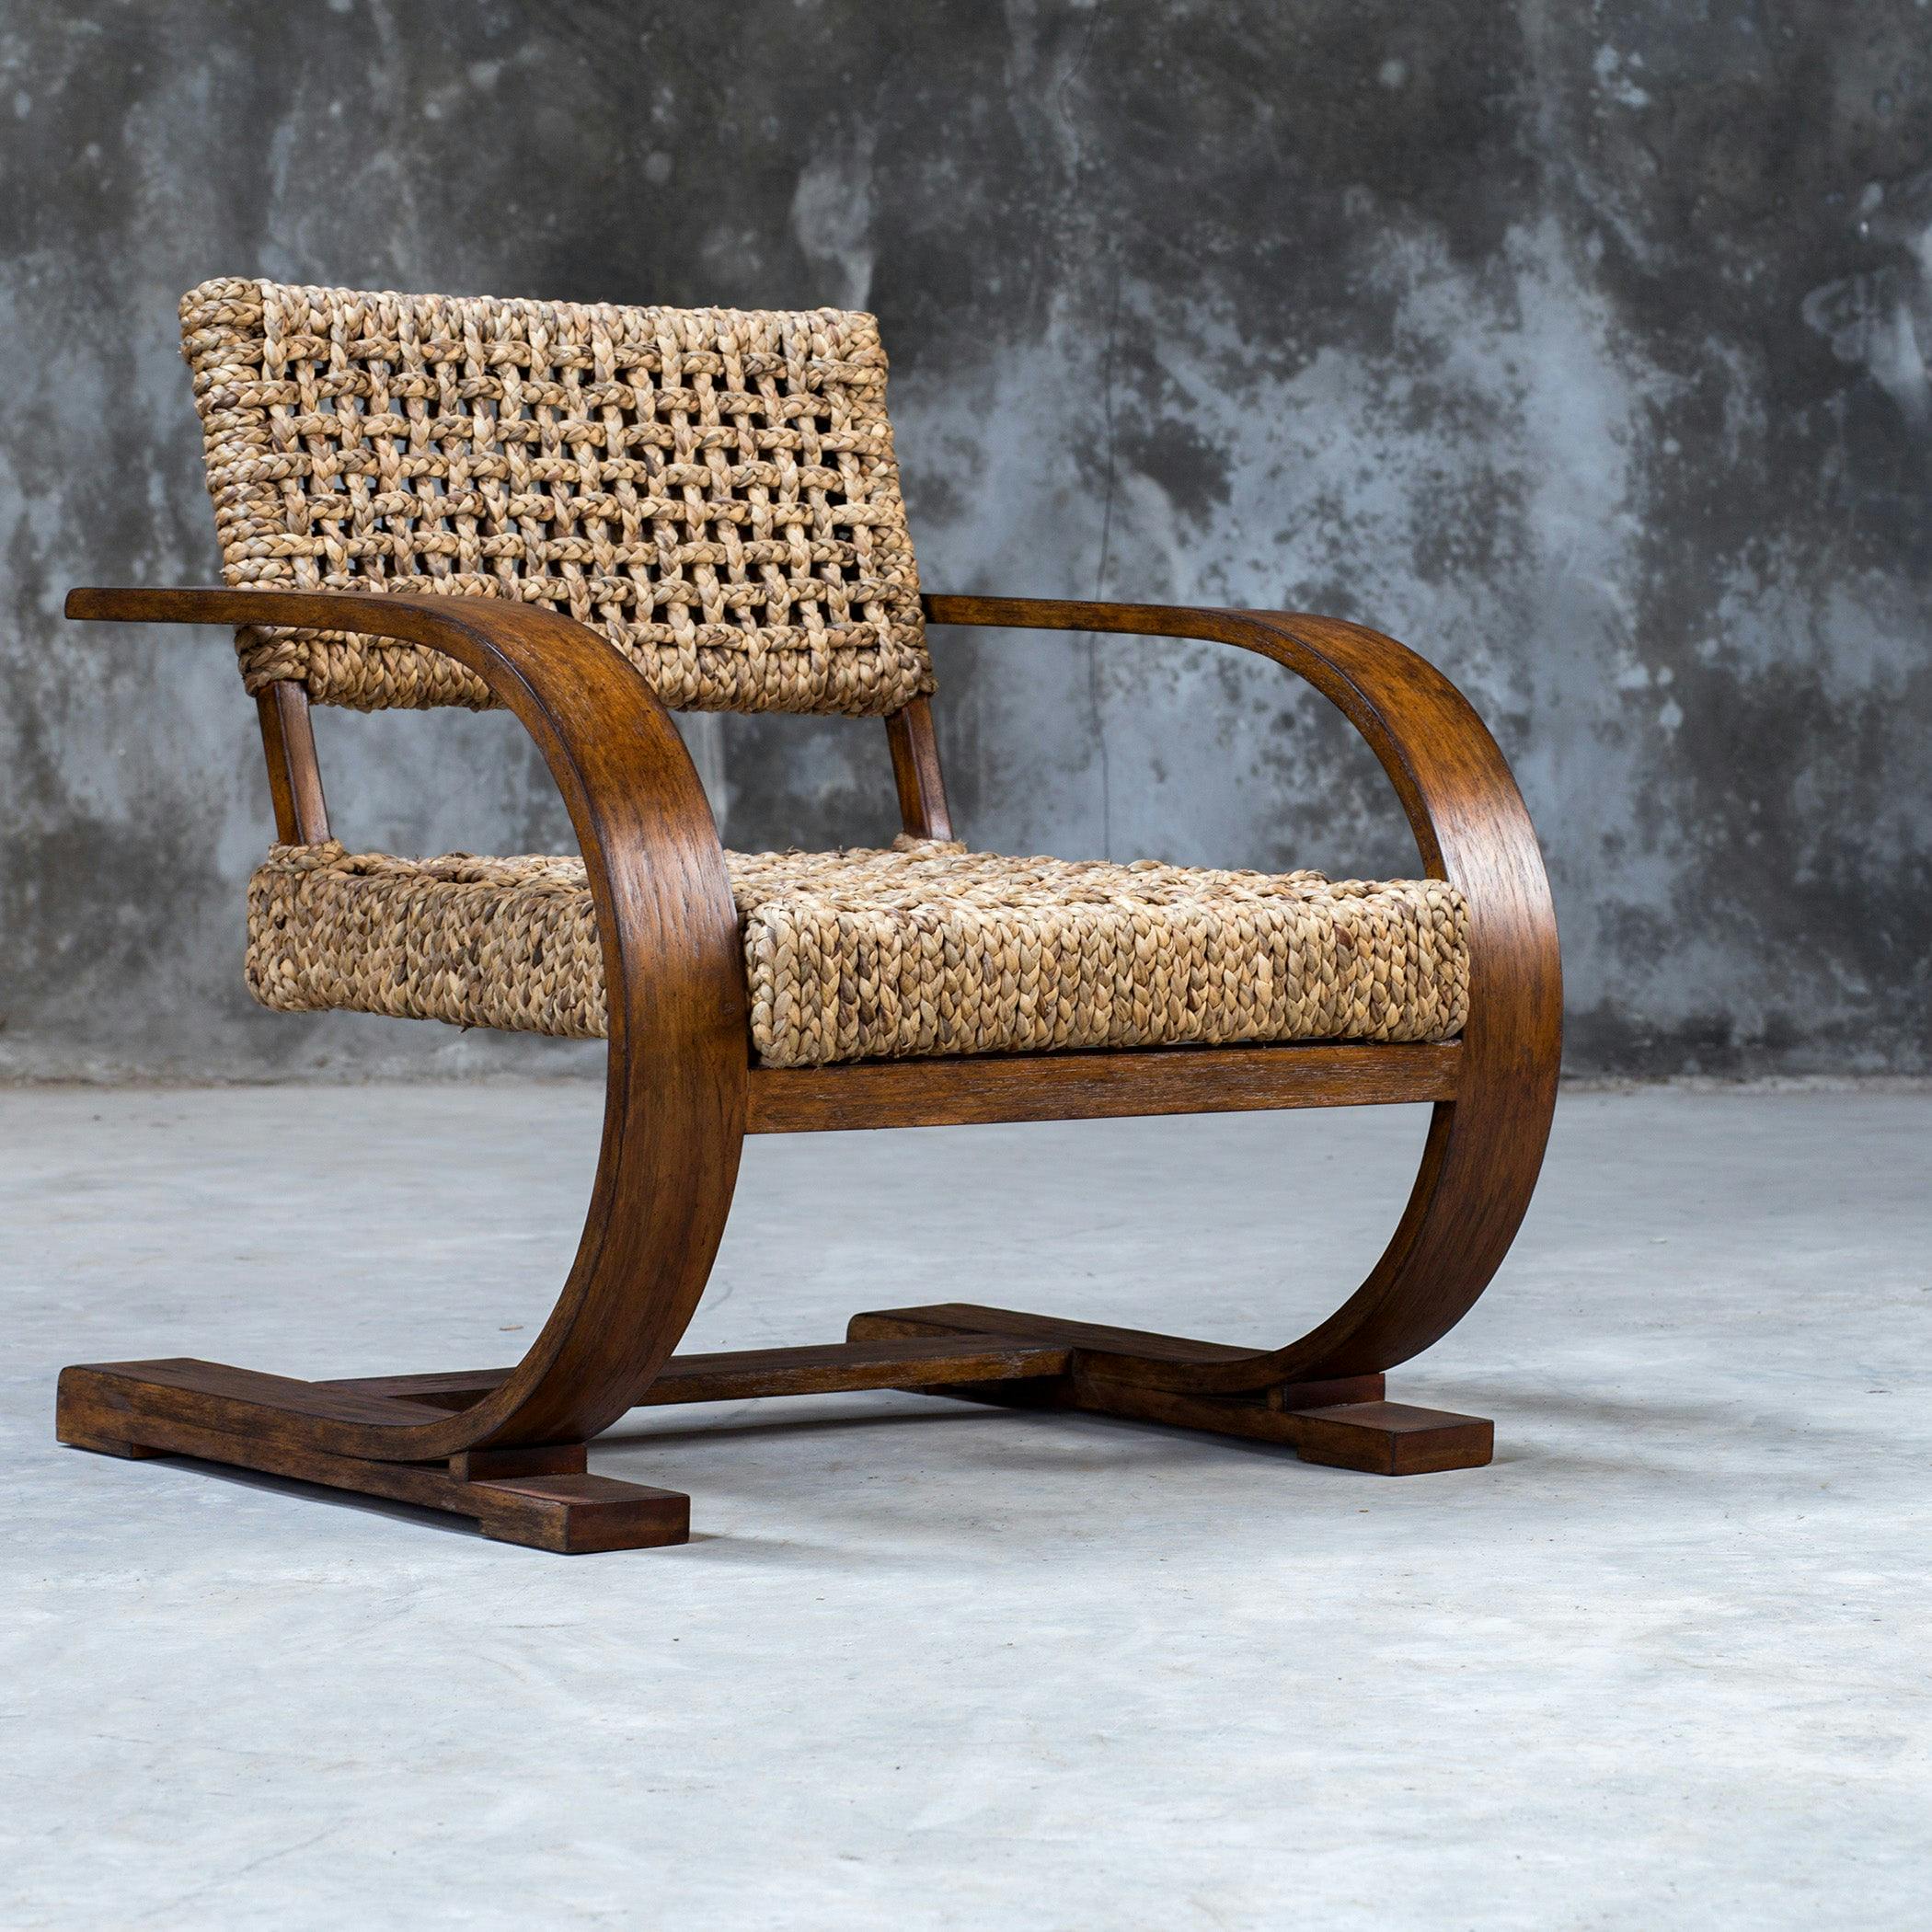 Rehema Natural Woven Banana Fiber and Solid Wood Accent Chair